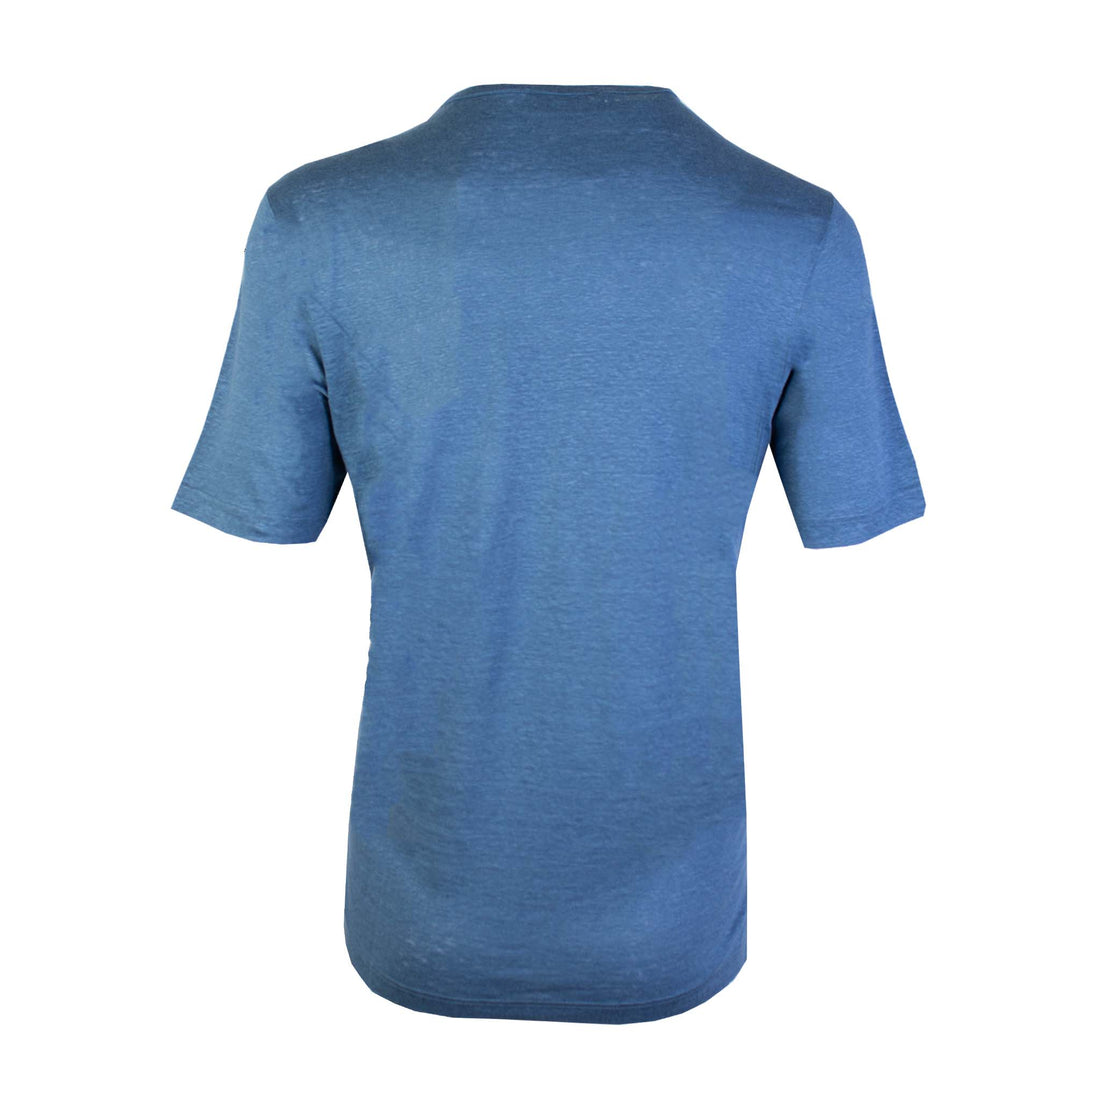 Lardini Powder Blue Wool T-Shirt with Embroidered Detail